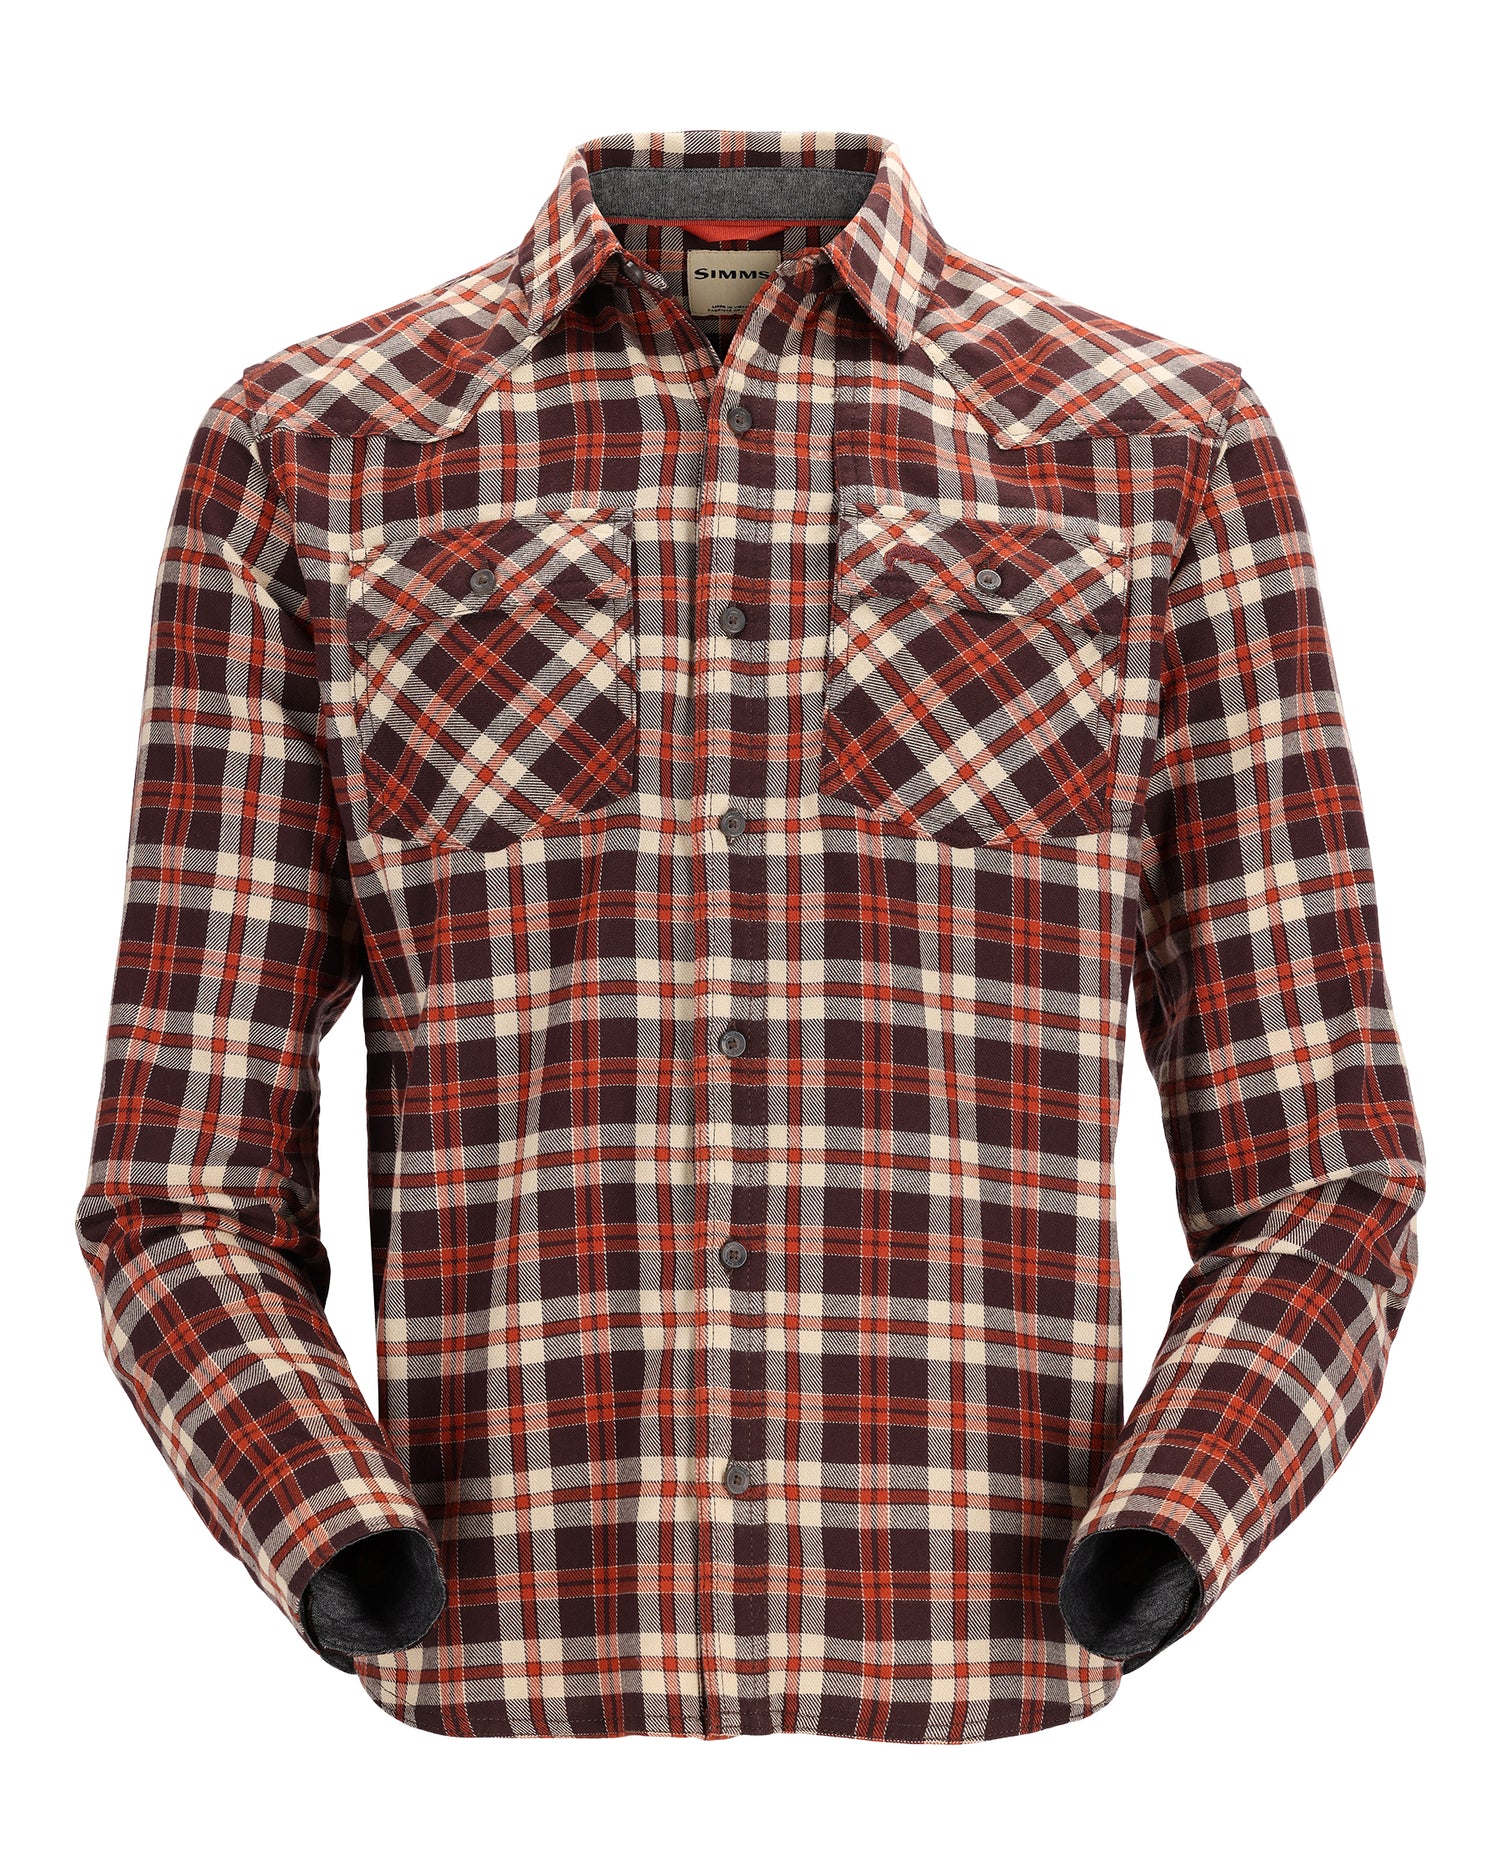 santee-flannel-Maghoany/Tan Camp Plaid-mannequin